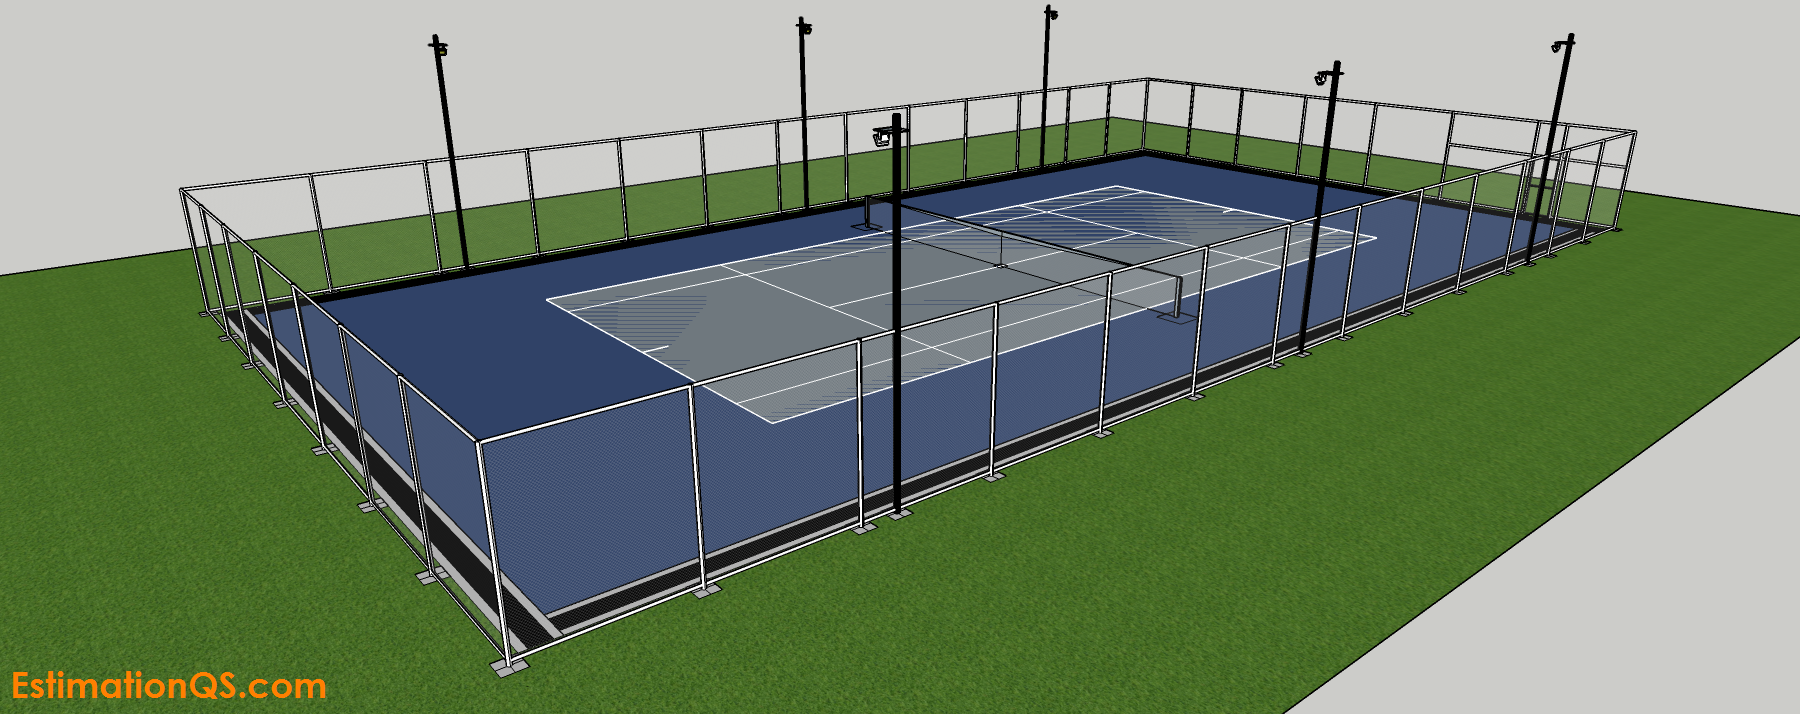 court tennis lawn acrylic isometric finished including